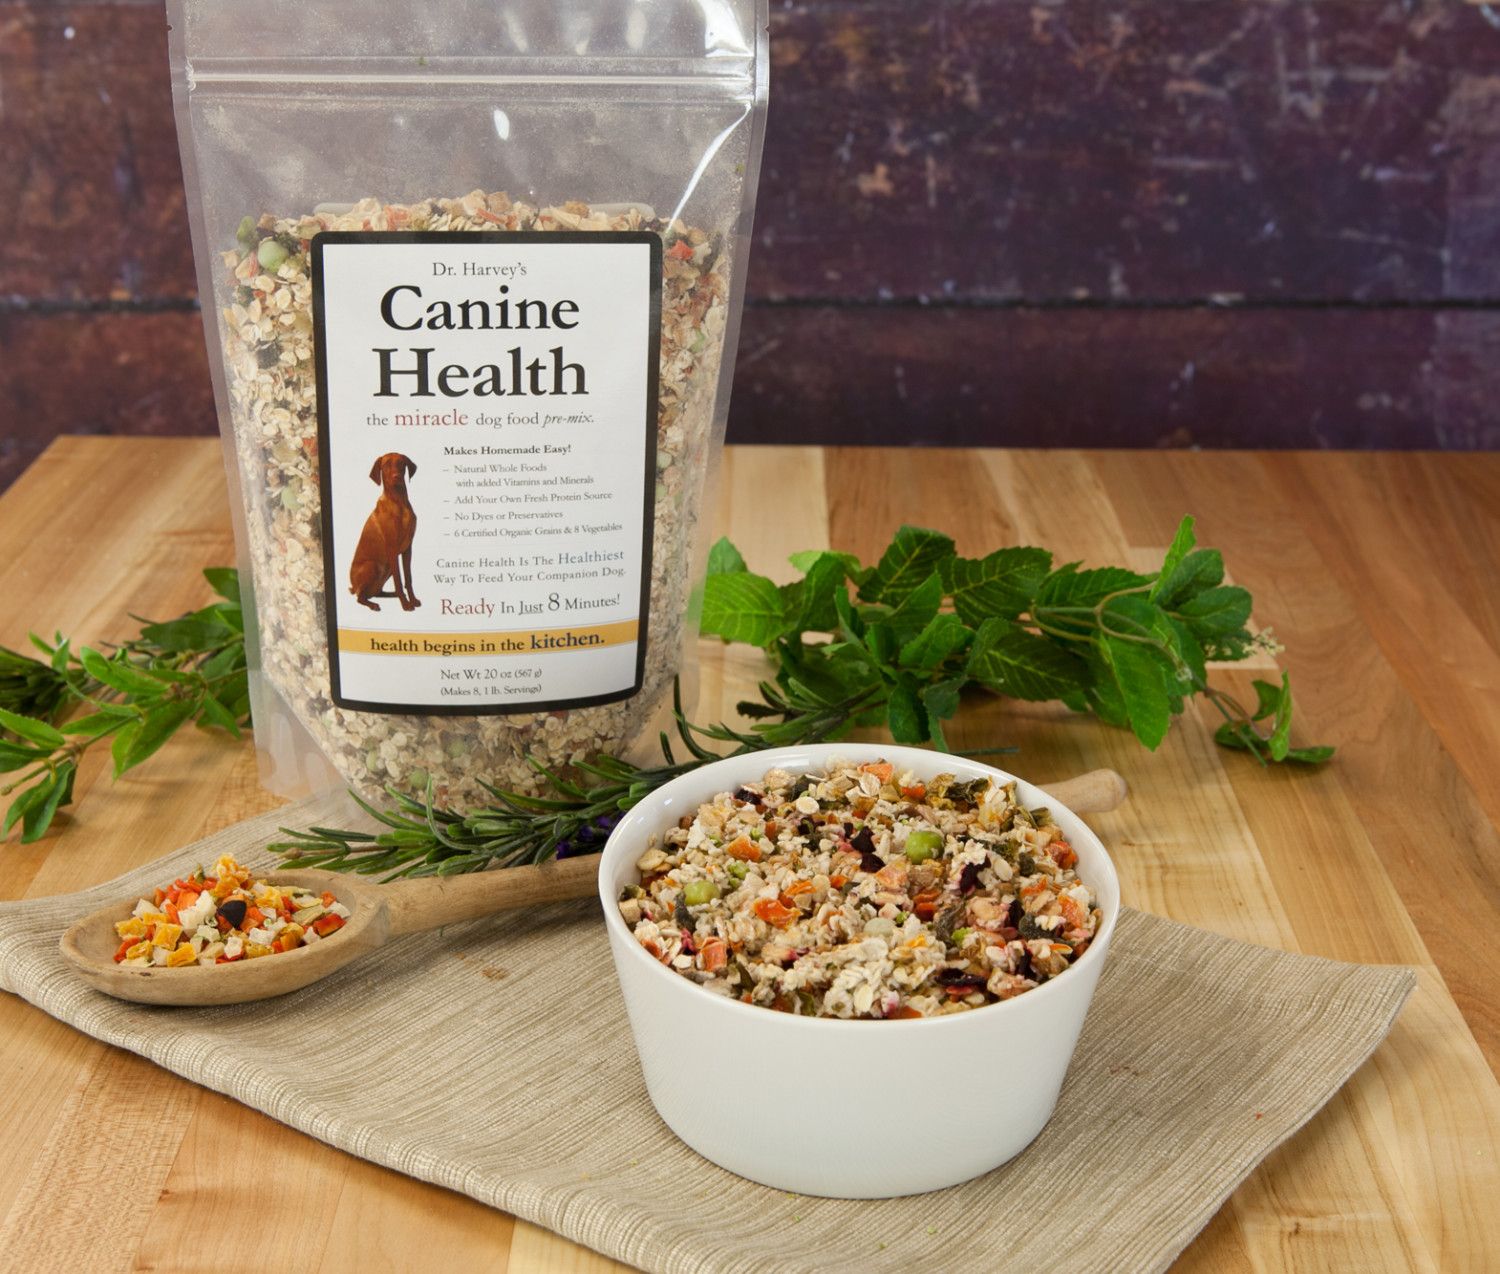 Homemade Food For Dogs With Kidney Disease